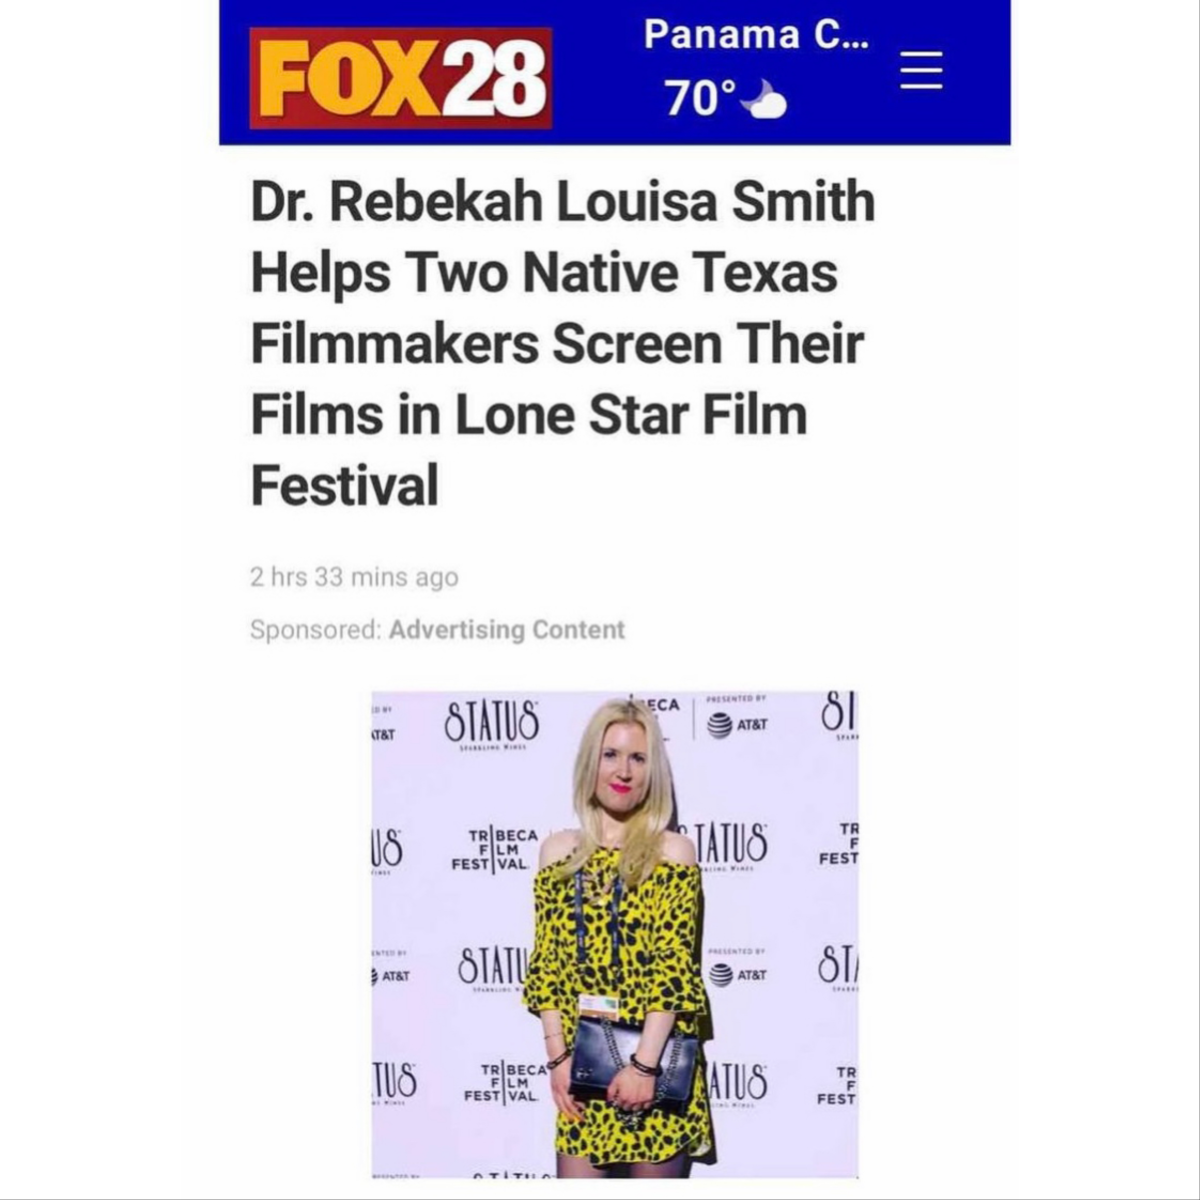 Dr. Rebekah Louisa Smith Helps Two Native Texas Filmmakers Screen Their Films in Lone Star Film Festival